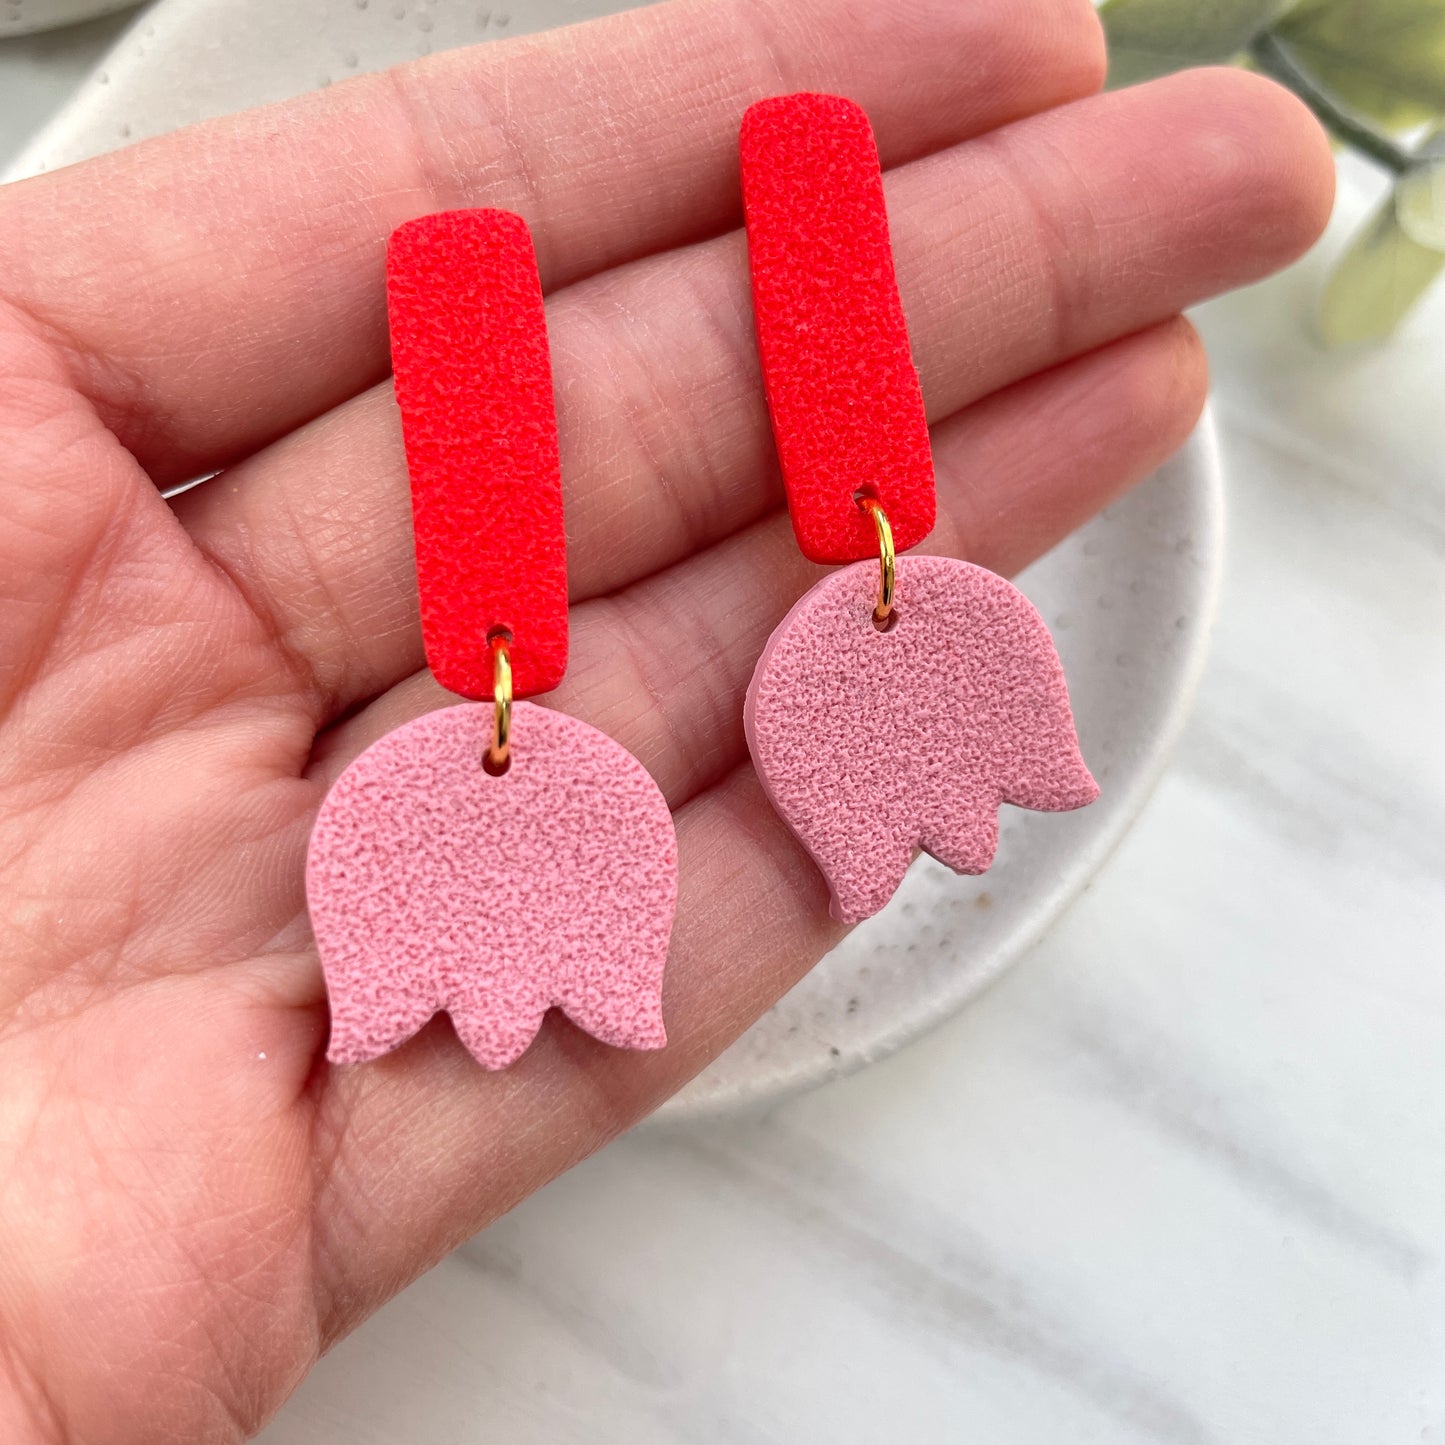 Red and pink polymer clay flower dangles